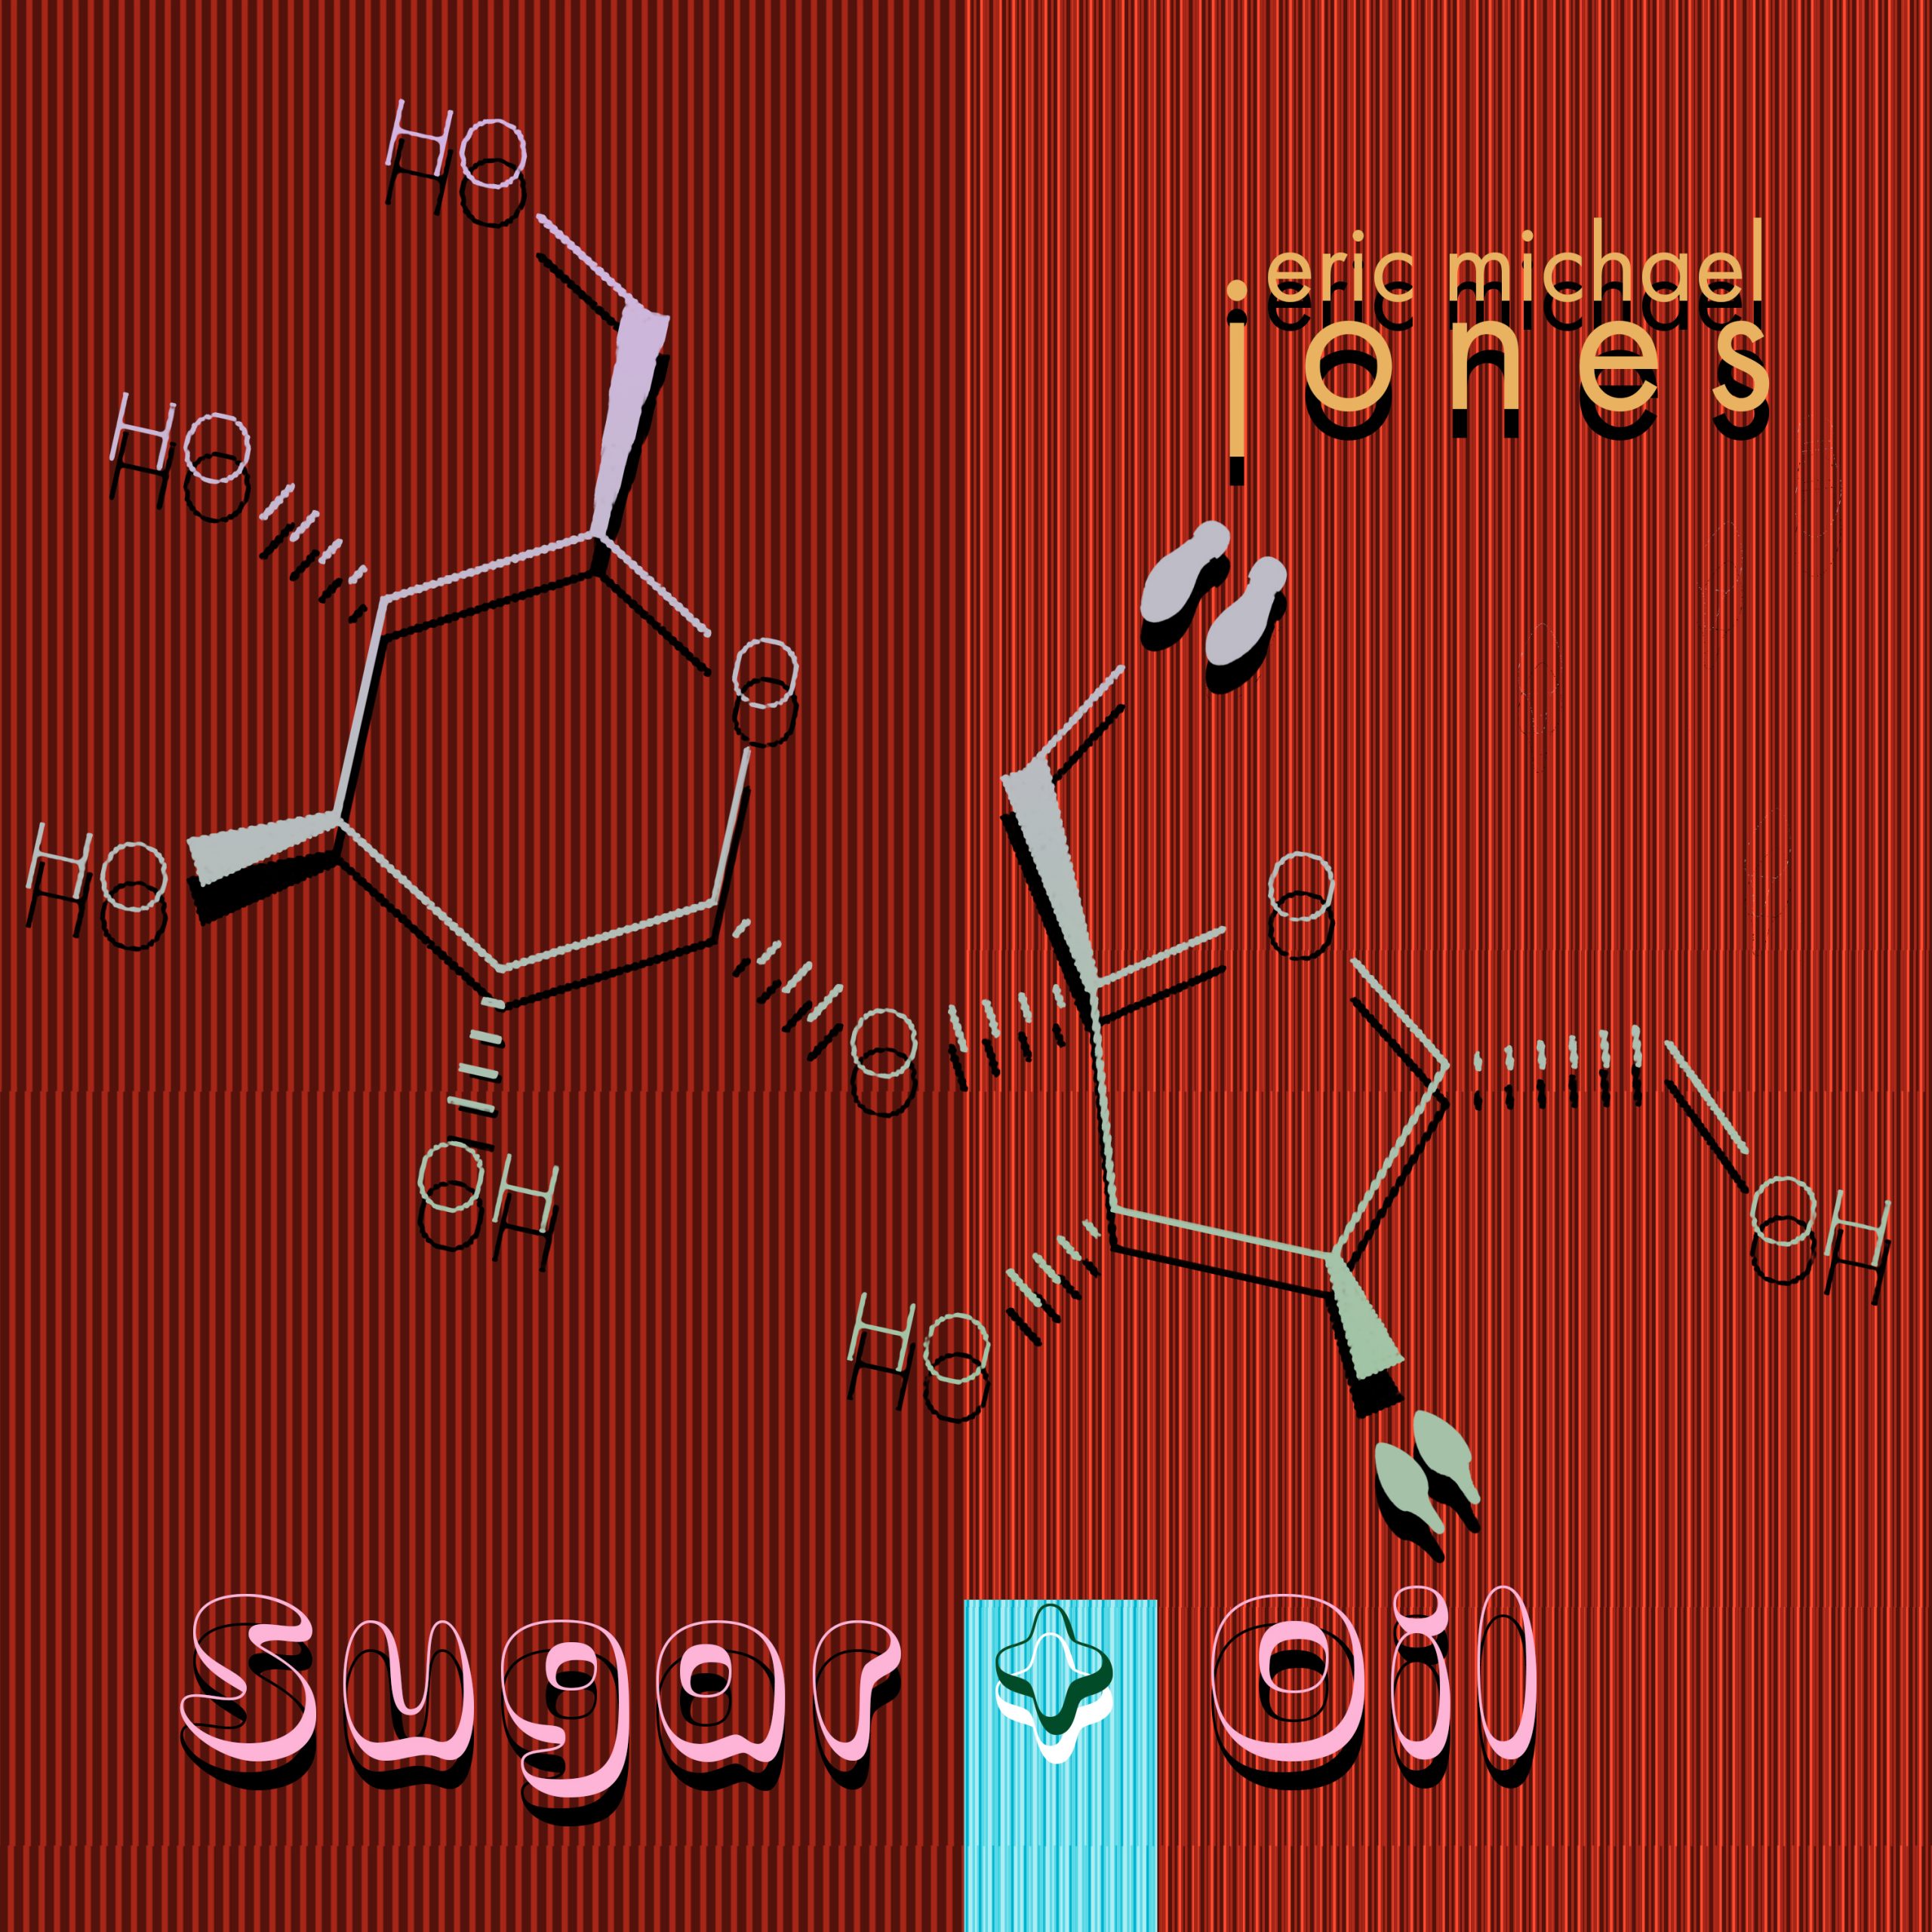 Cover art for Sugar And Oil shows a graphic design of molecules dancing